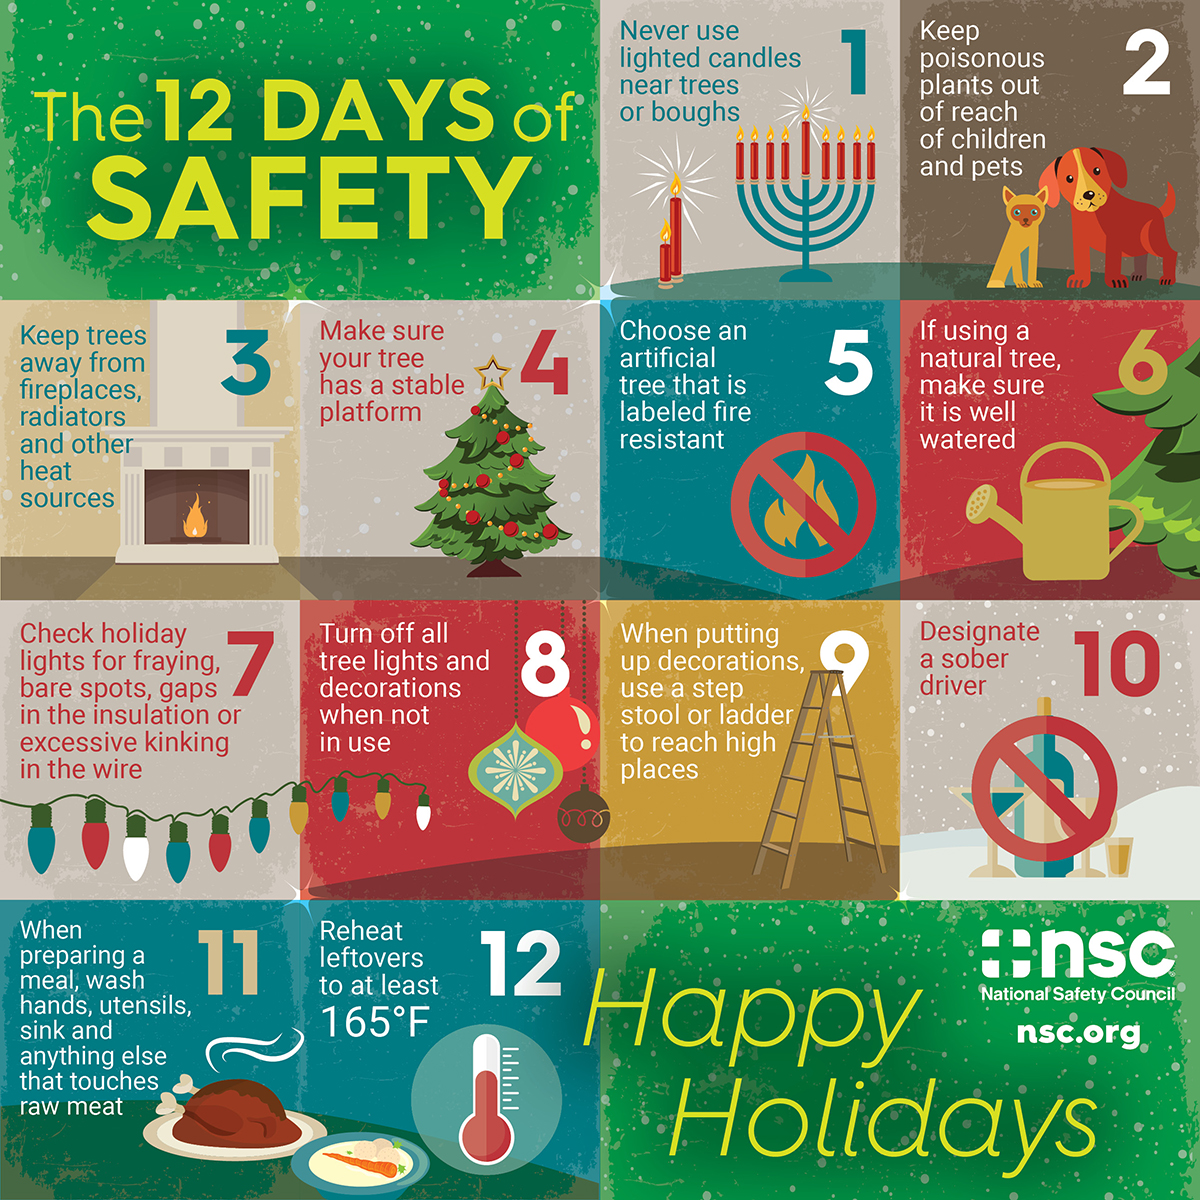 Holiday safety tips from the National Safety Council